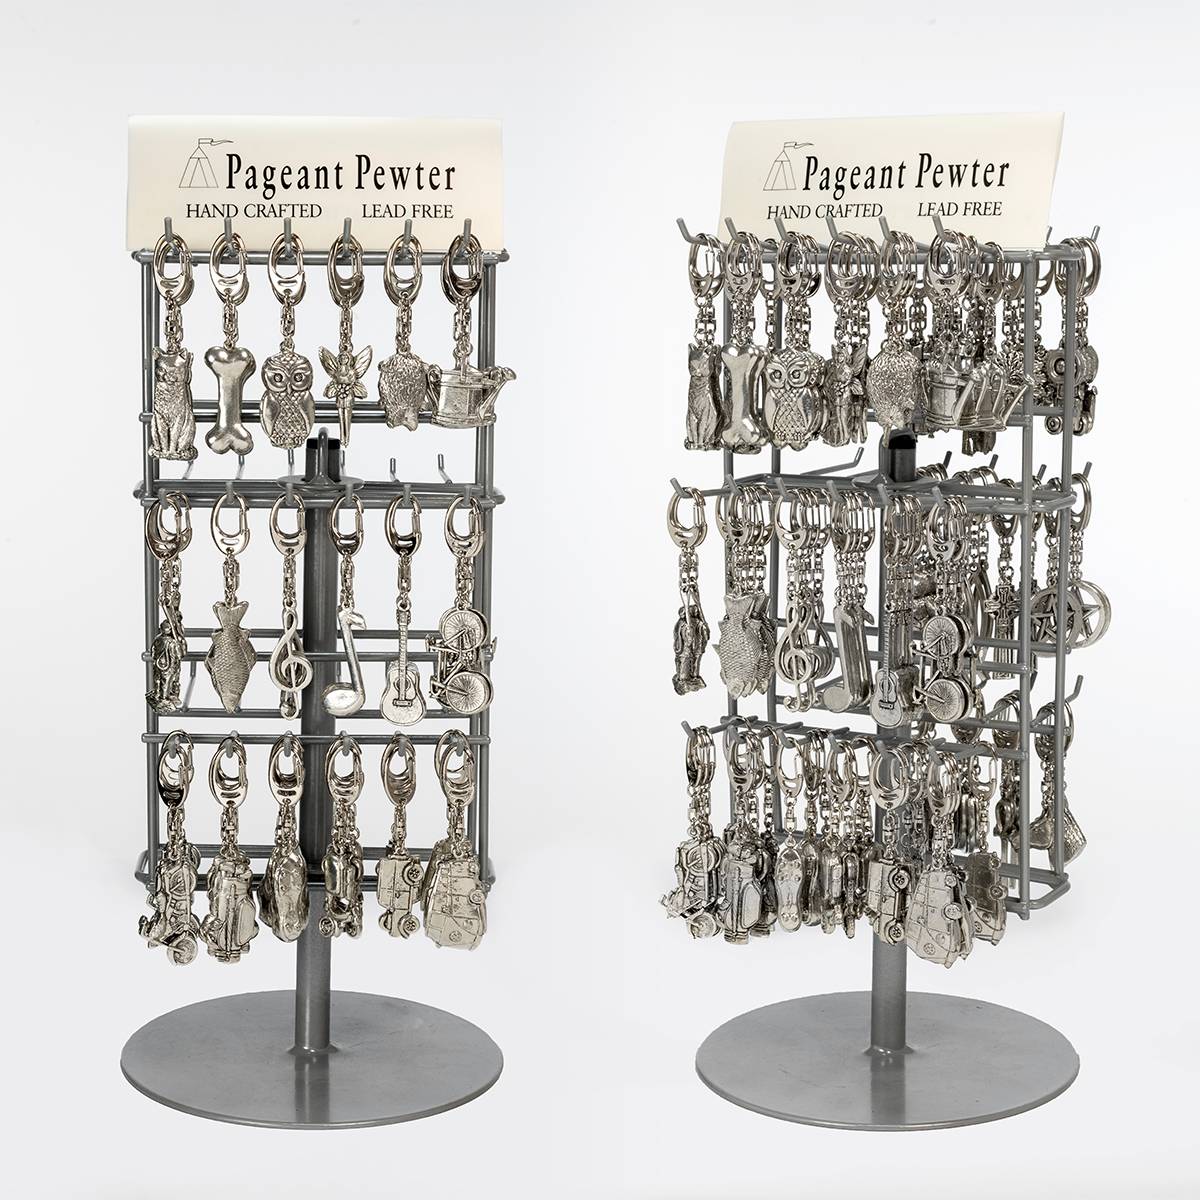 Keyring Display Stand - Pageant Pewter